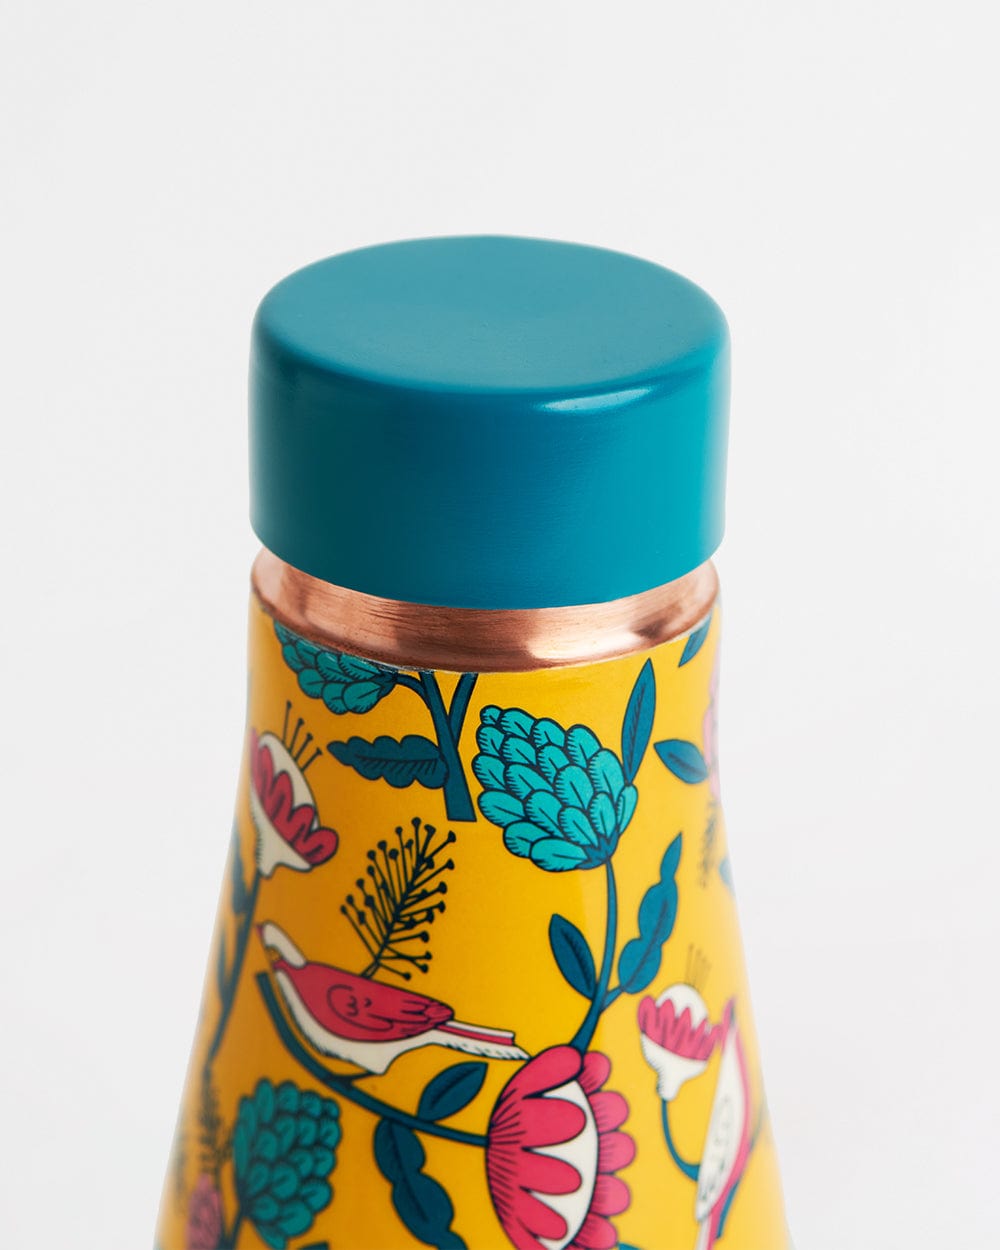 Chumbak Bloomin’ Good  Creepers Copper Bottle